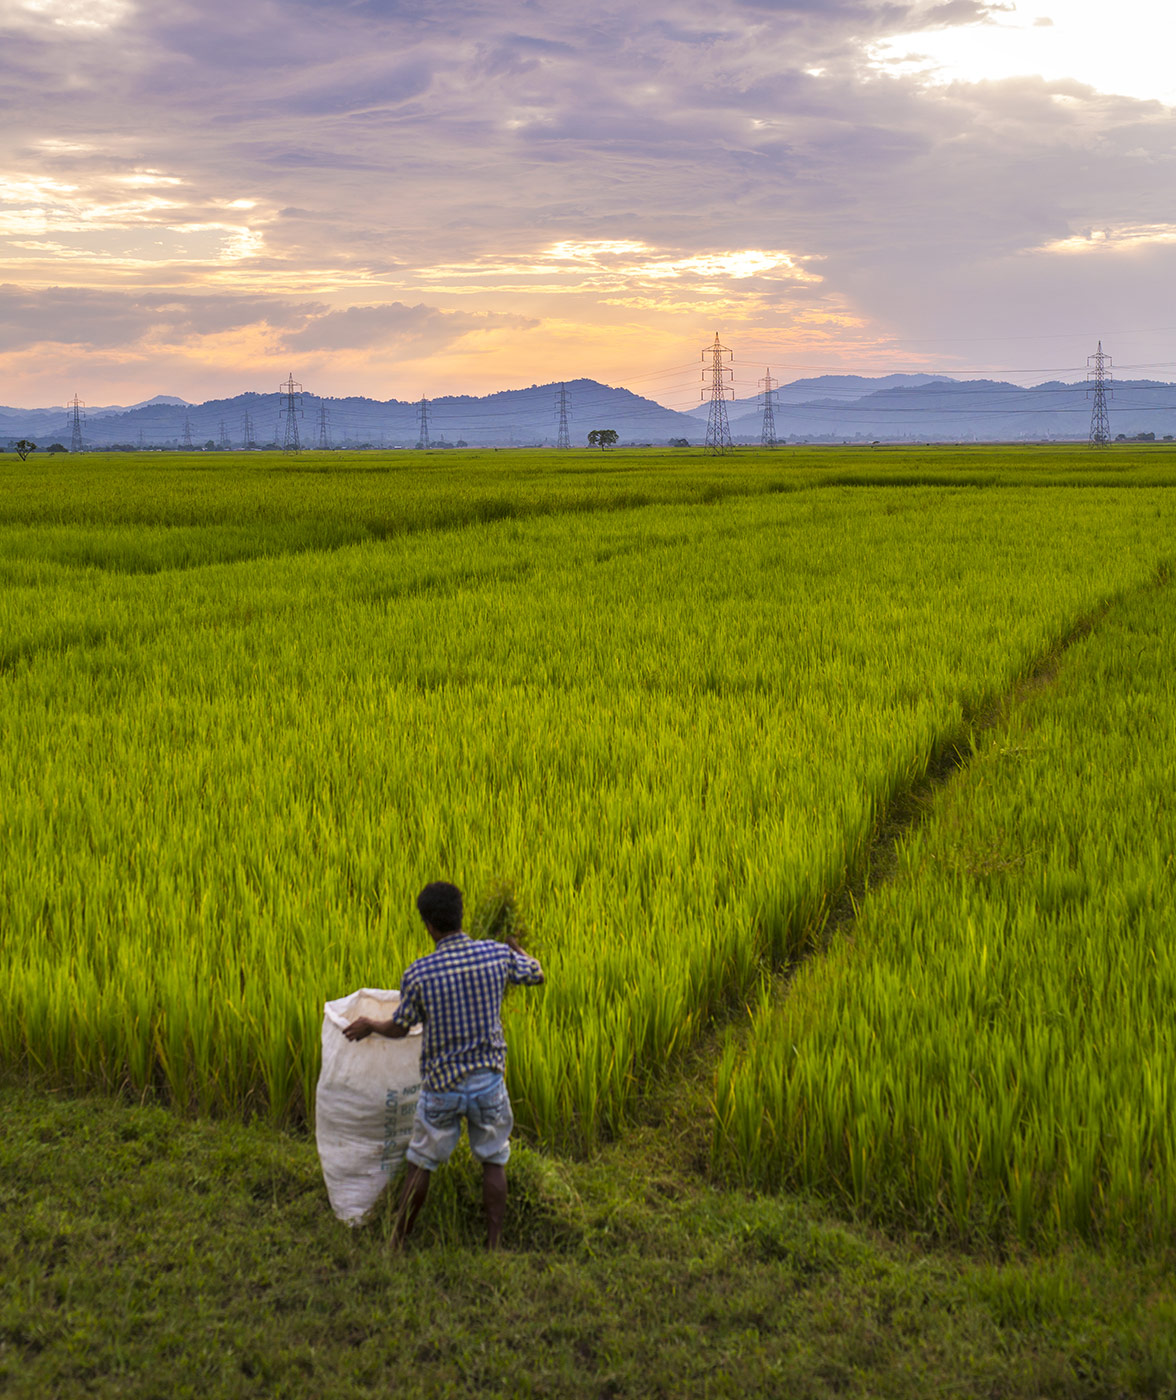 Man working at a rice field with power supply line in background (photo)